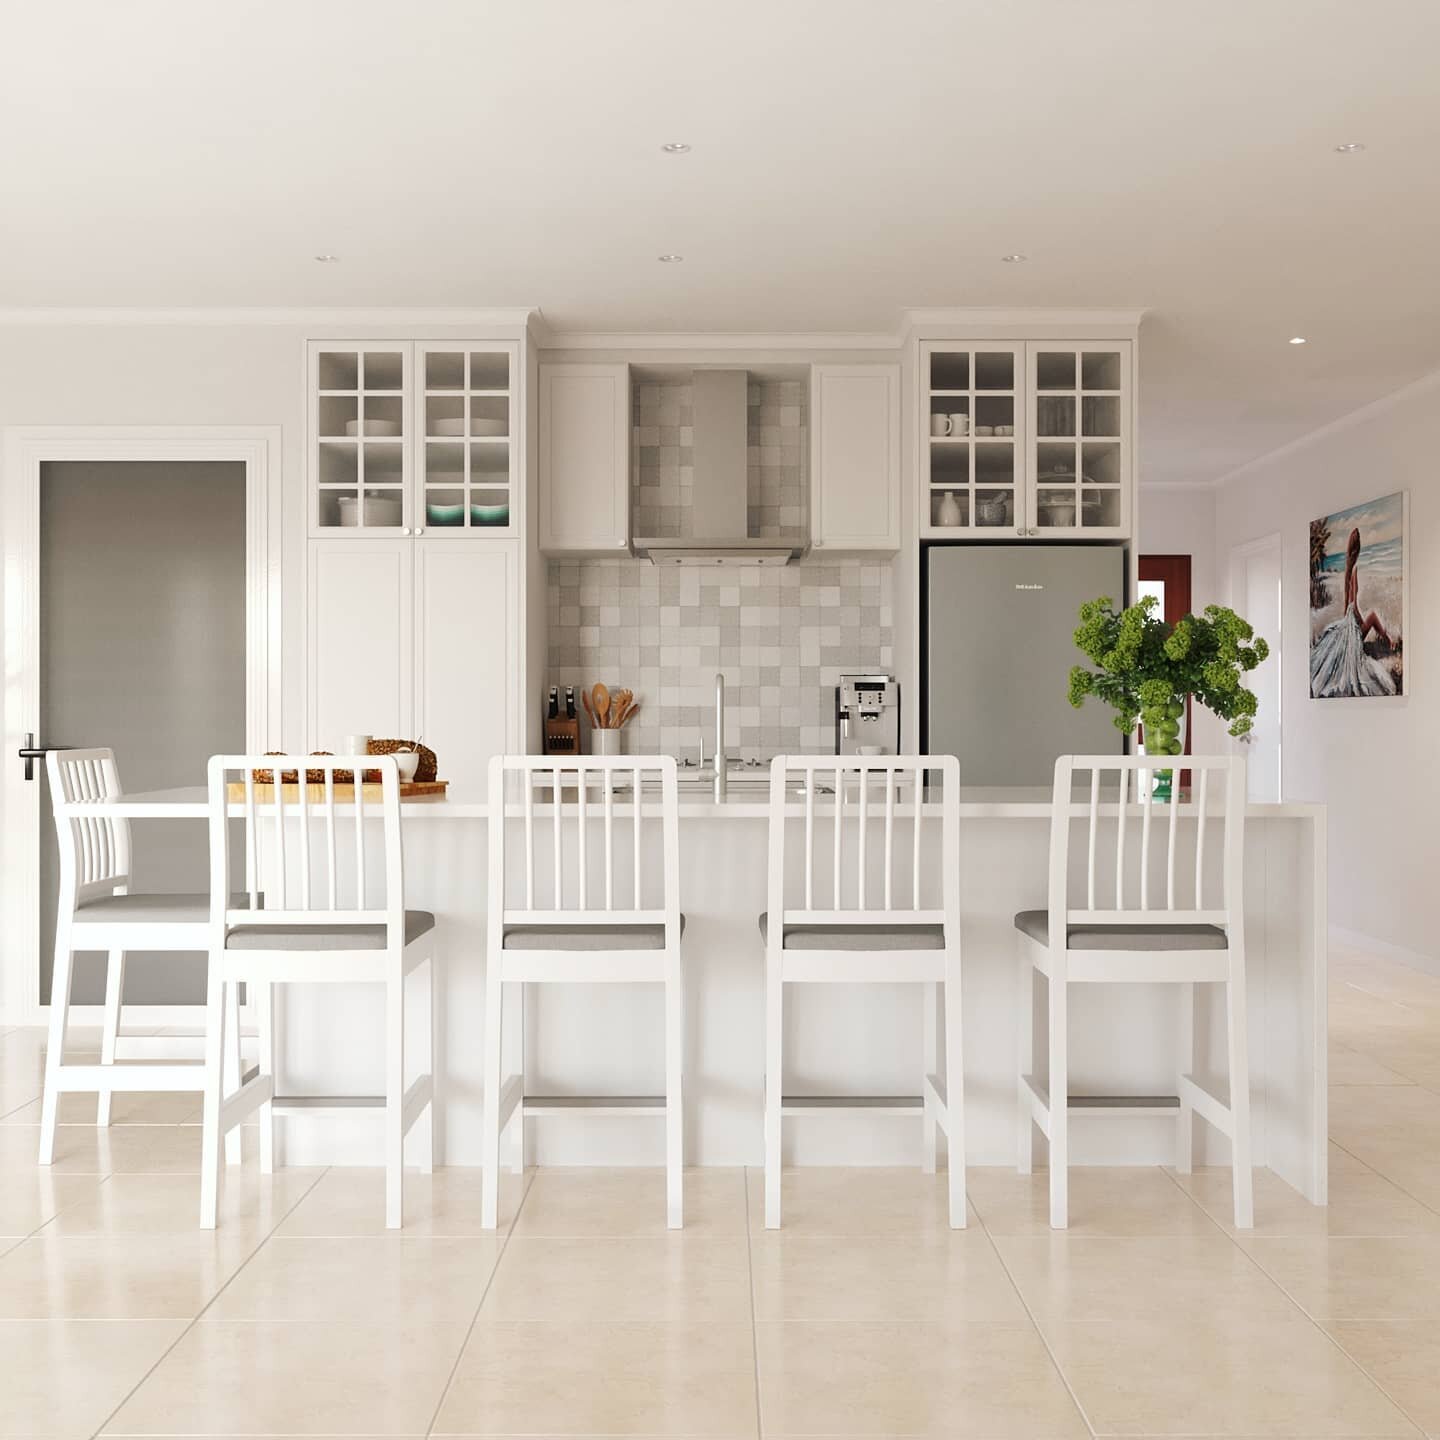 Recently completed design &amp; renders for a local kitchen renovation. Our client wanted a contemporary take on the Hamptons style &amp; a white/grey colour scheme to fit into their open plan living room styling. We made a point of accurately repres